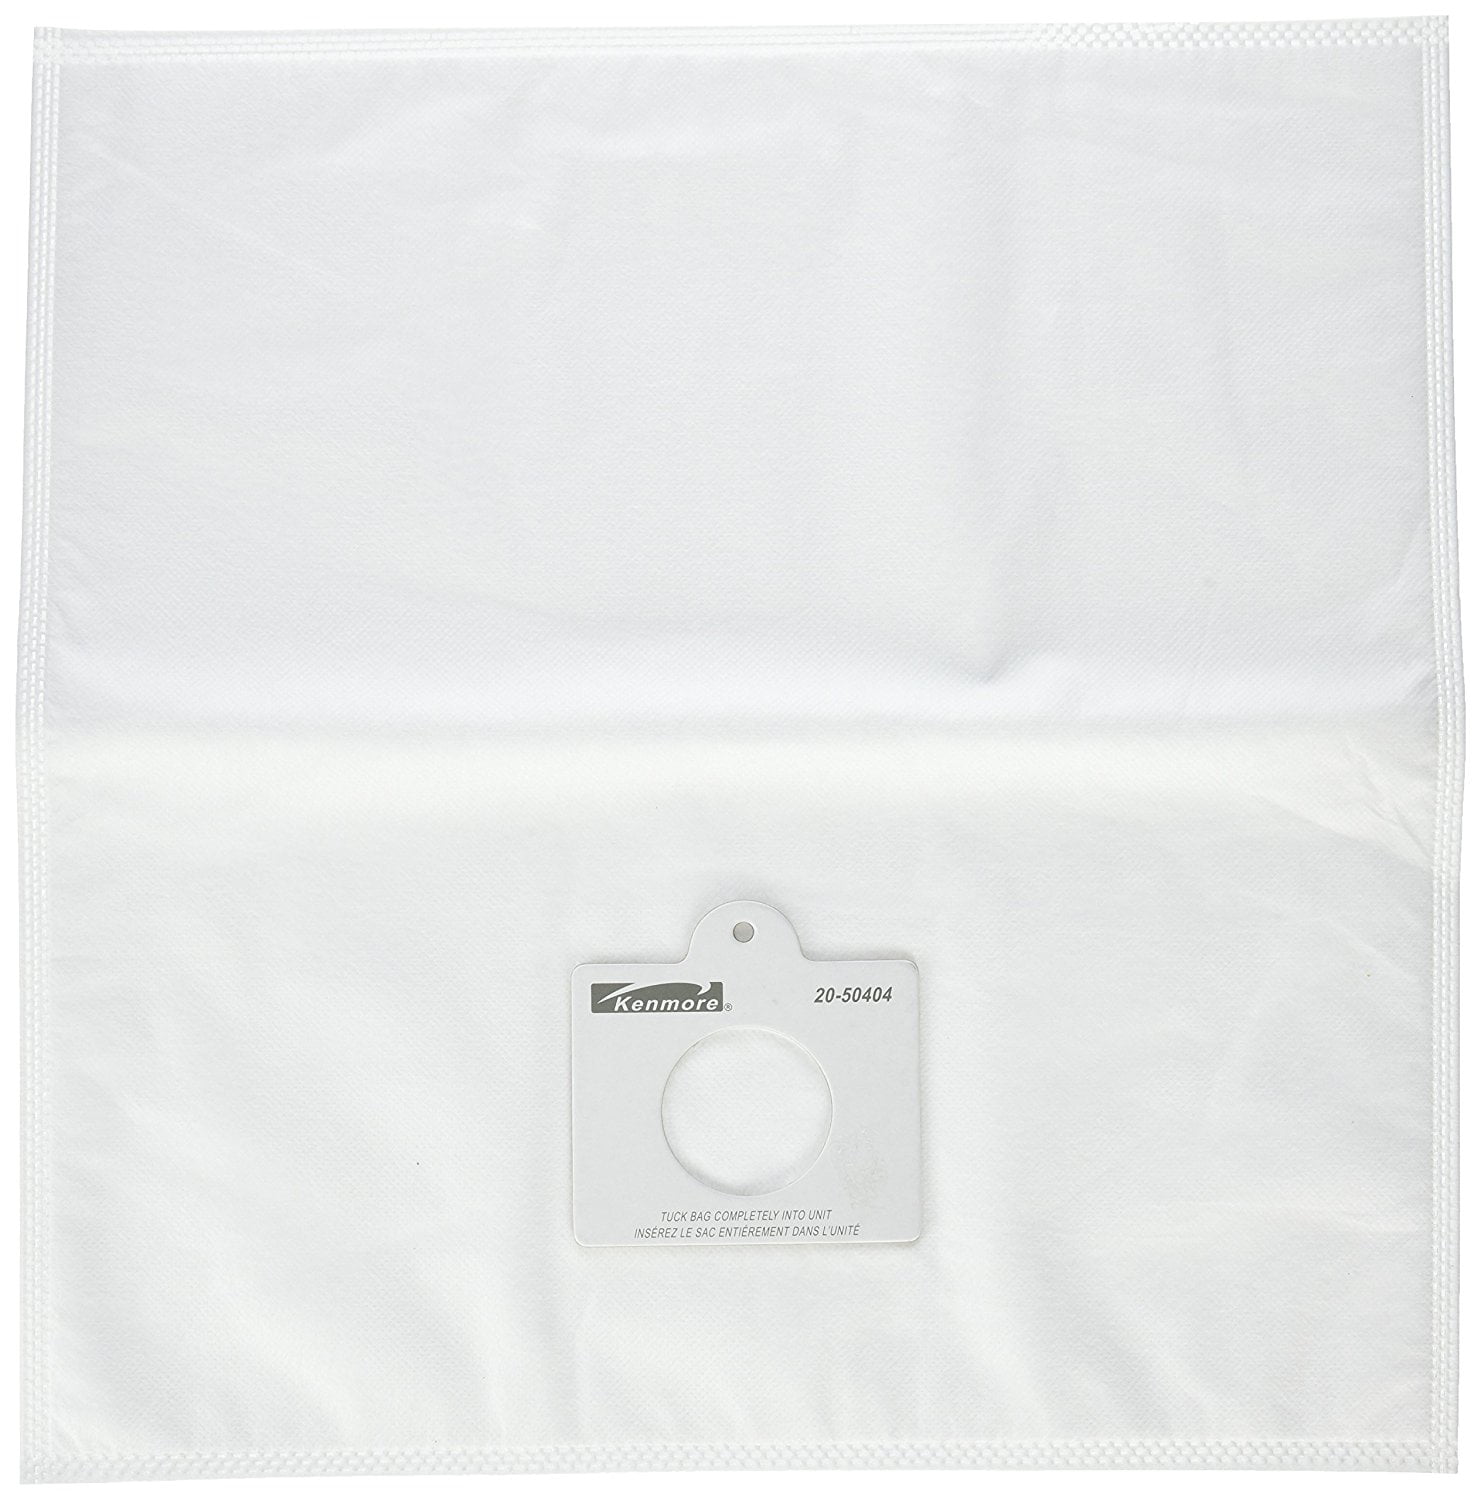 Kenmore 54321 3-Pack Style C Canister Allergen Filtration Vacuum Bags